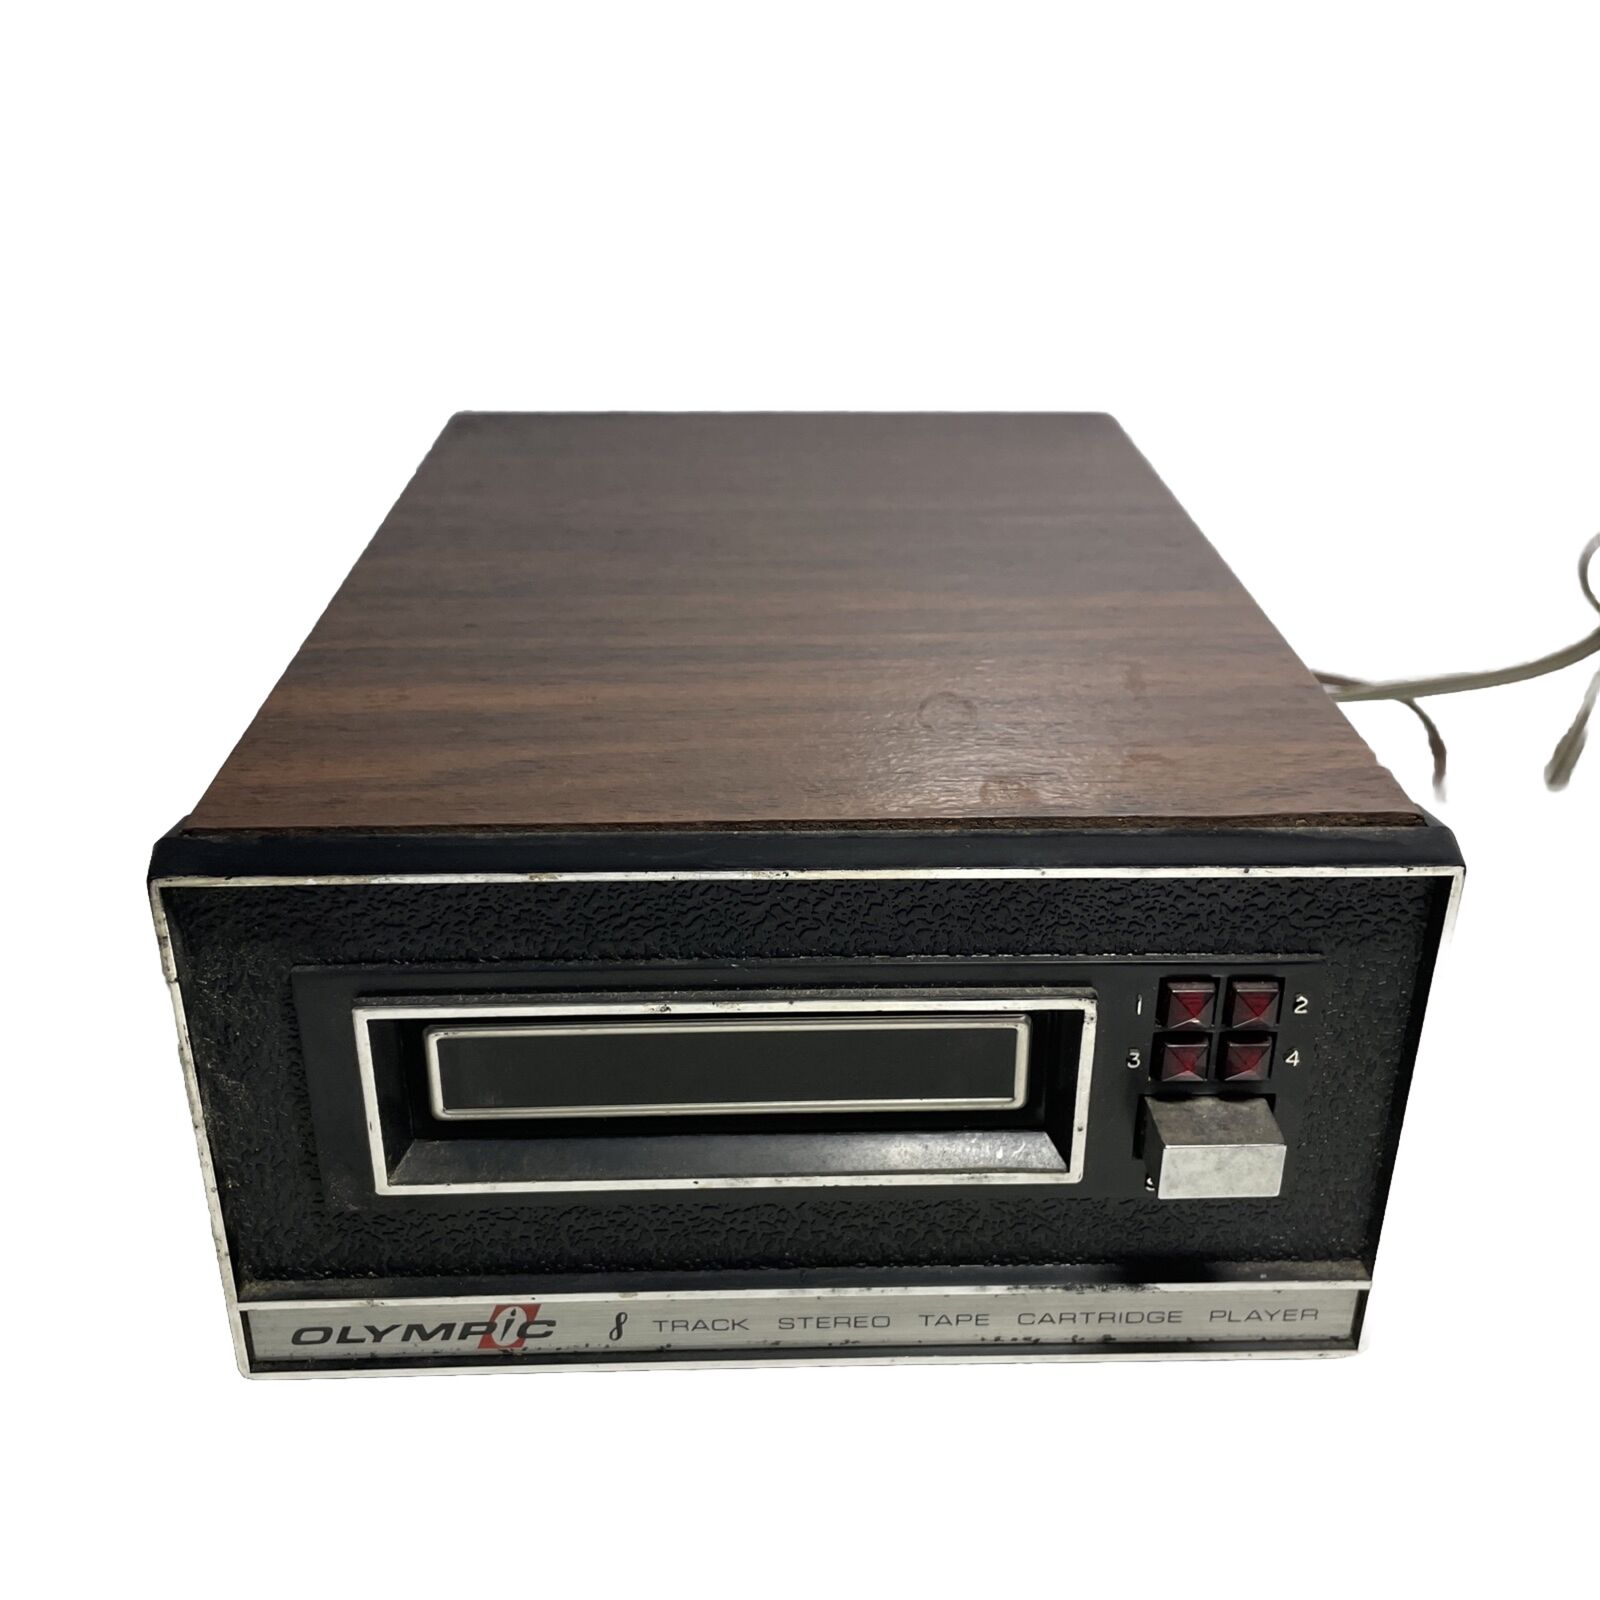 Olympic 8-Track Tape Cartridge Player Model TD31 Wood Grain Untested Powers On